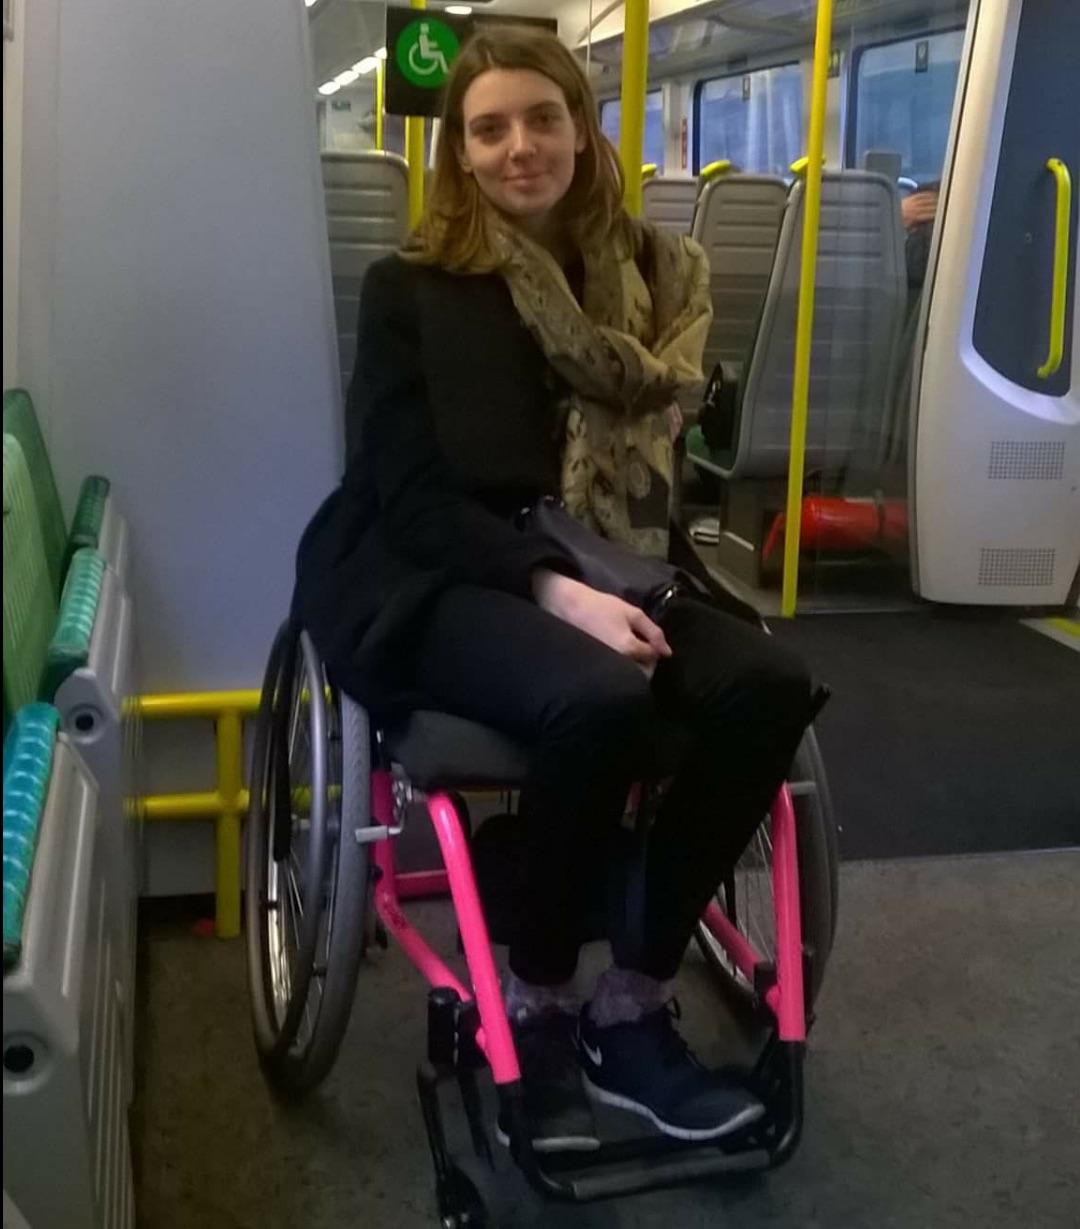 Allport-Grantham uses a wheelchair to manage long distances